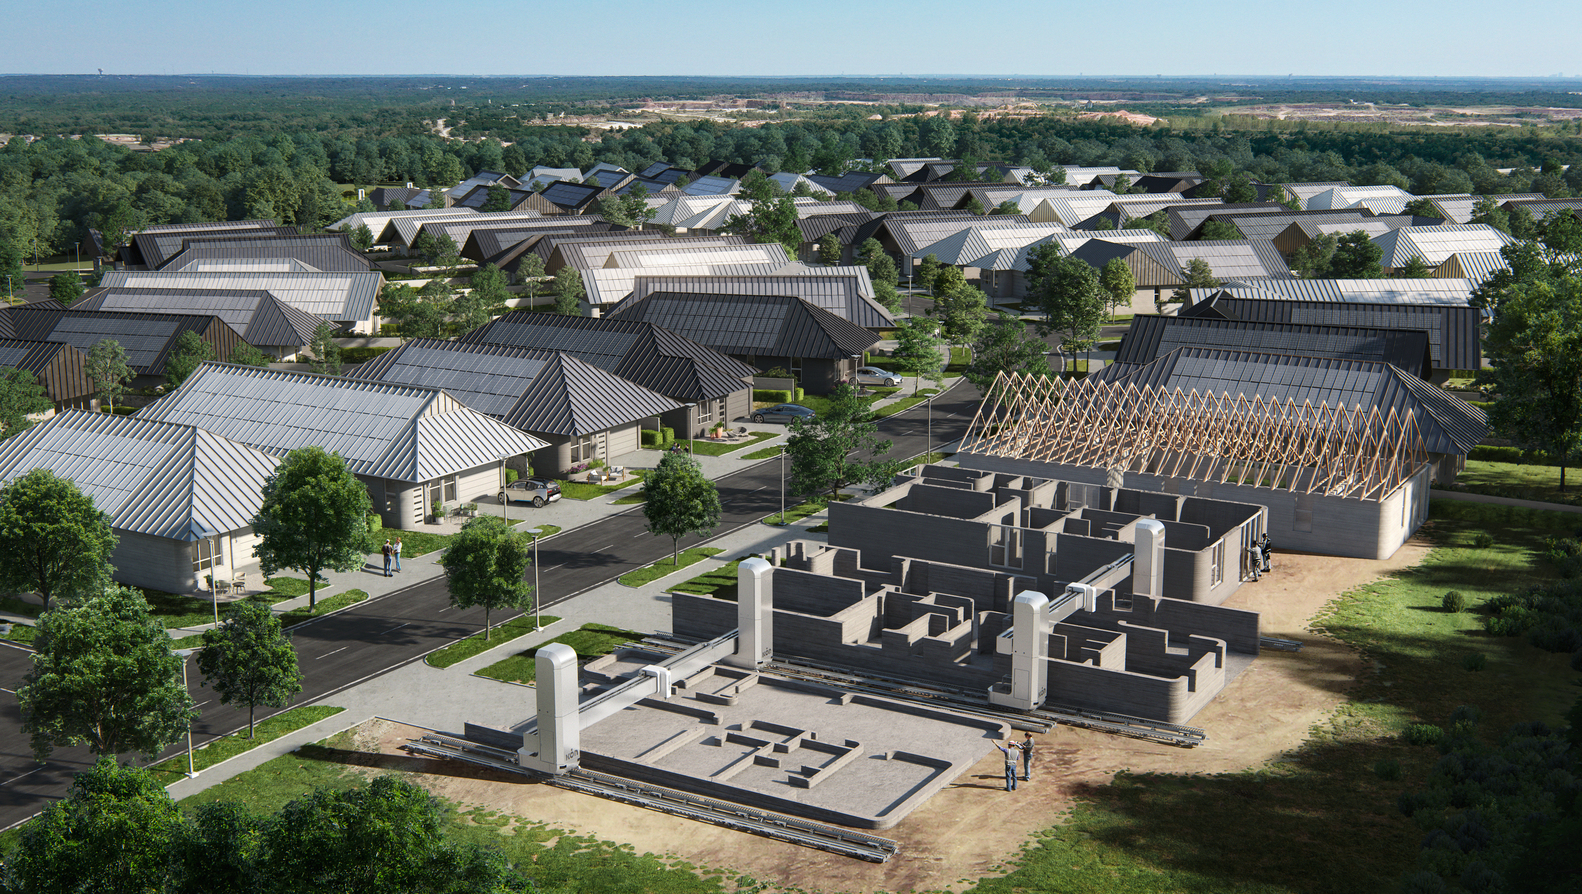 BIG, Lennar, and ICON are Building the World's Largest Neighborhood of 3D-Printed Homes